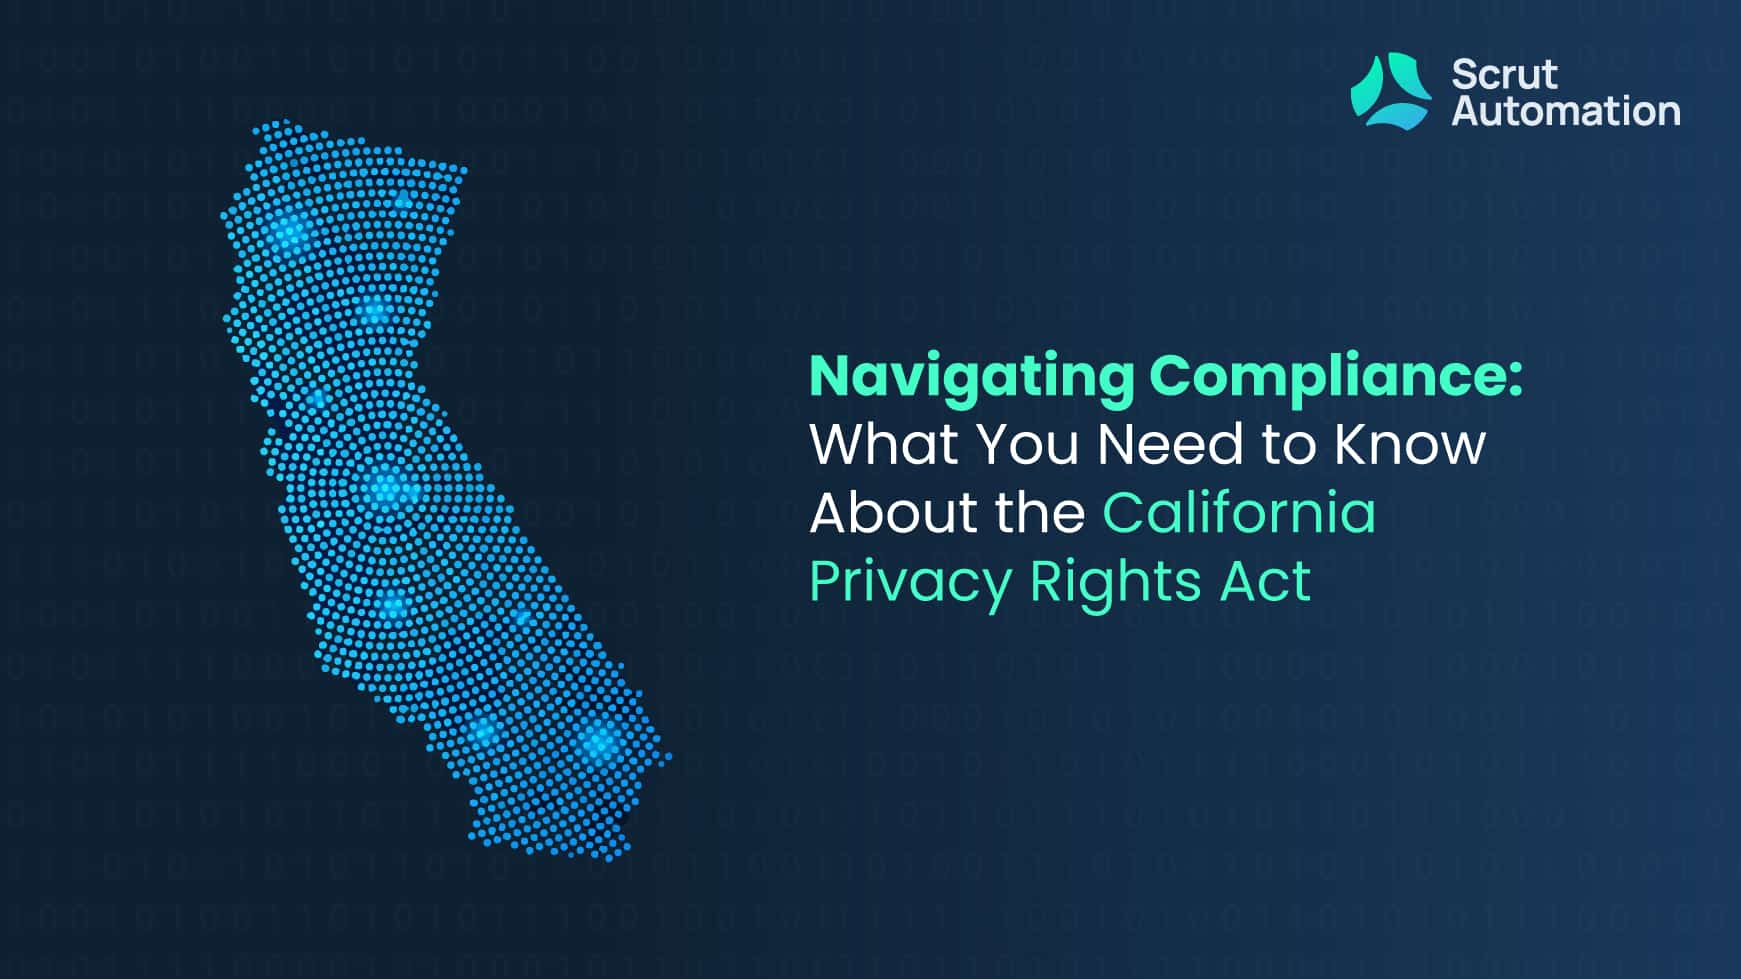 What You Need to Know About the California Privacy Rights Act